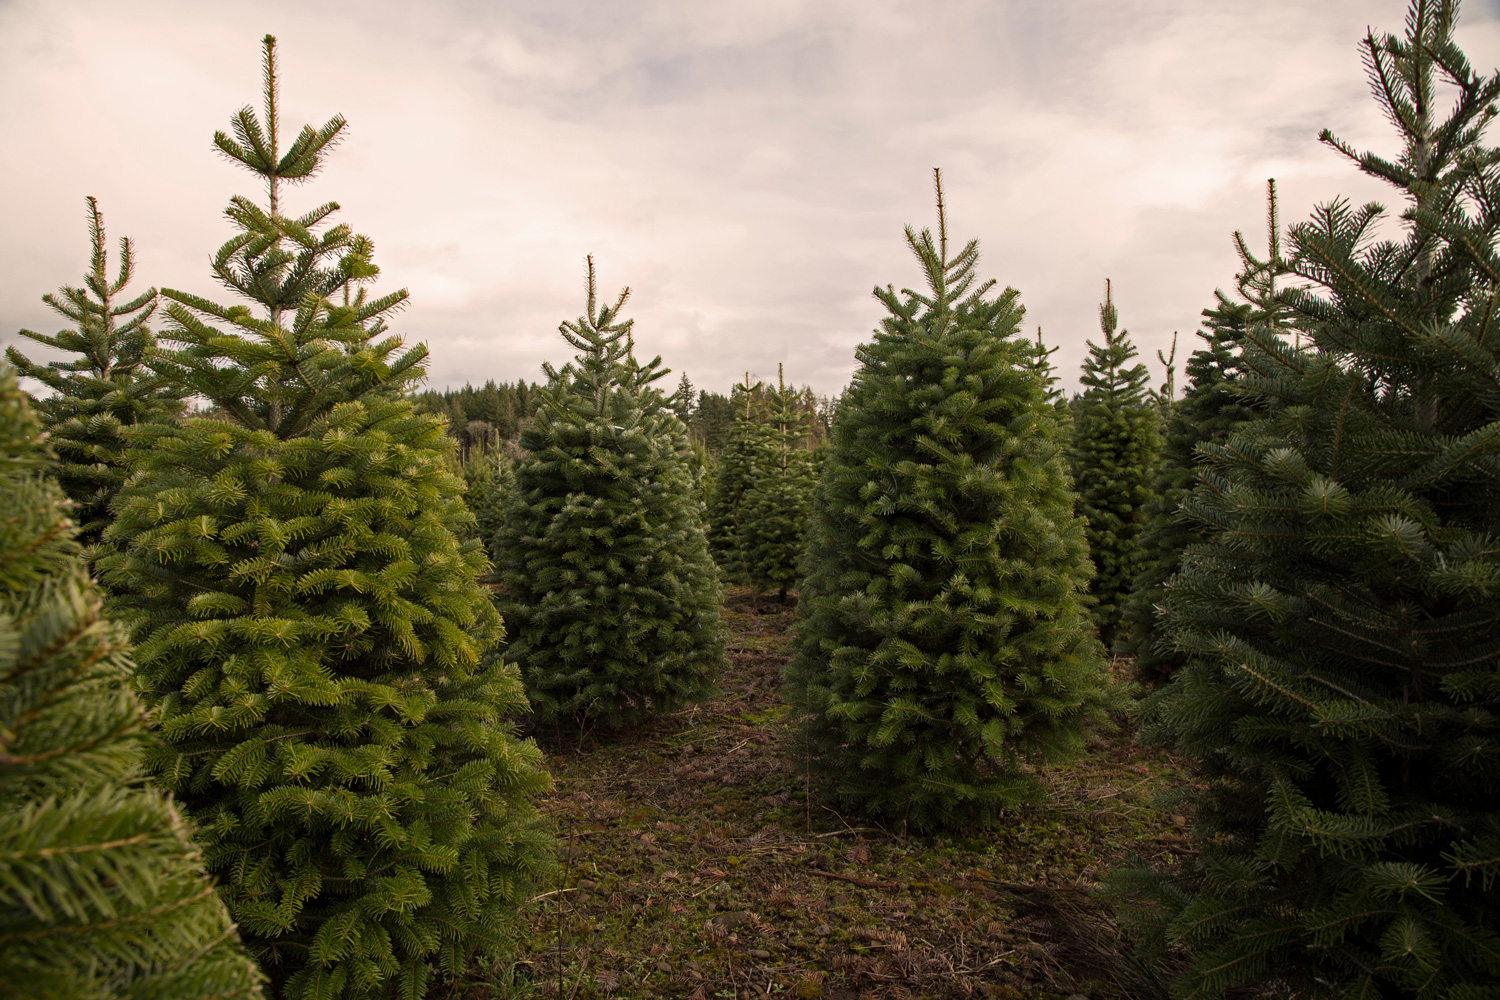 Close and Distant View of Staggered Douglas Fir Christmas Trees, Spring, Rich Soil, Clouded Pale Blue Sky, Daytime